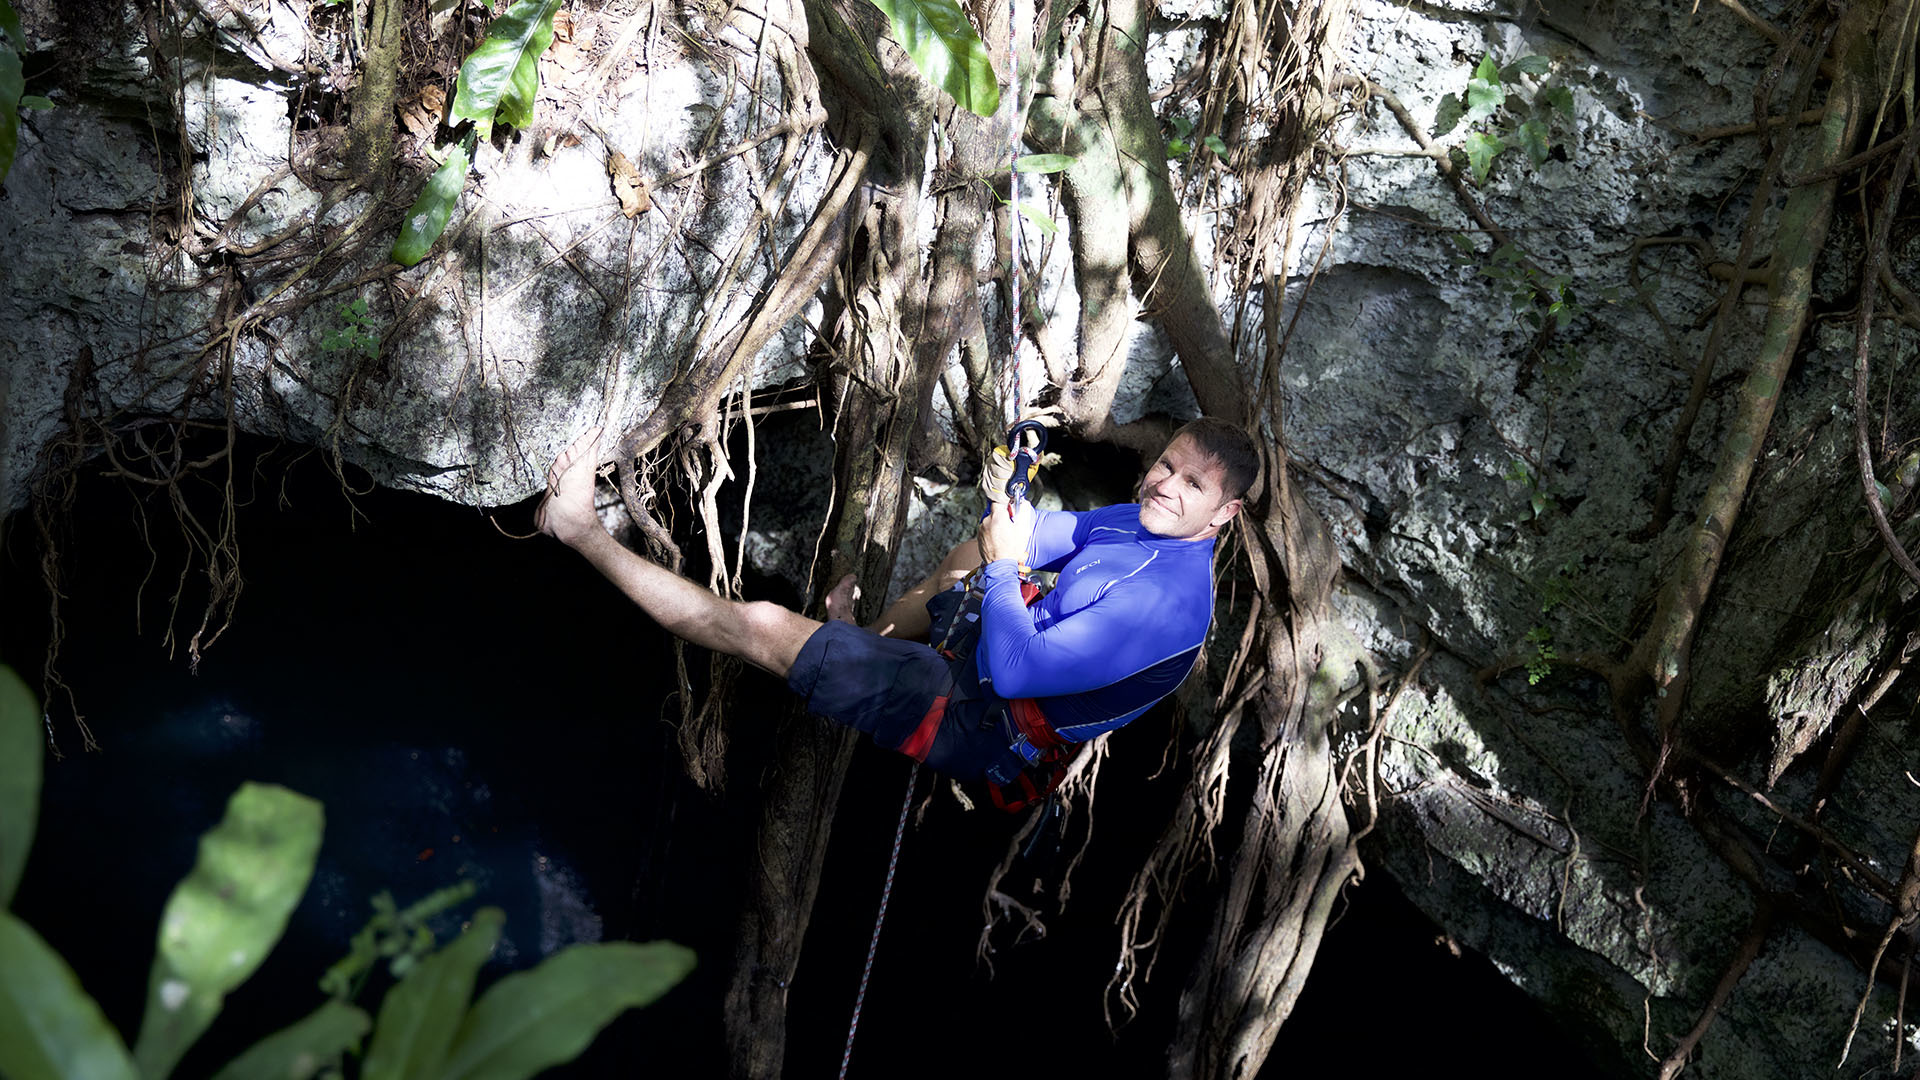 Image of Steve Backshall abseiling down a cenote.